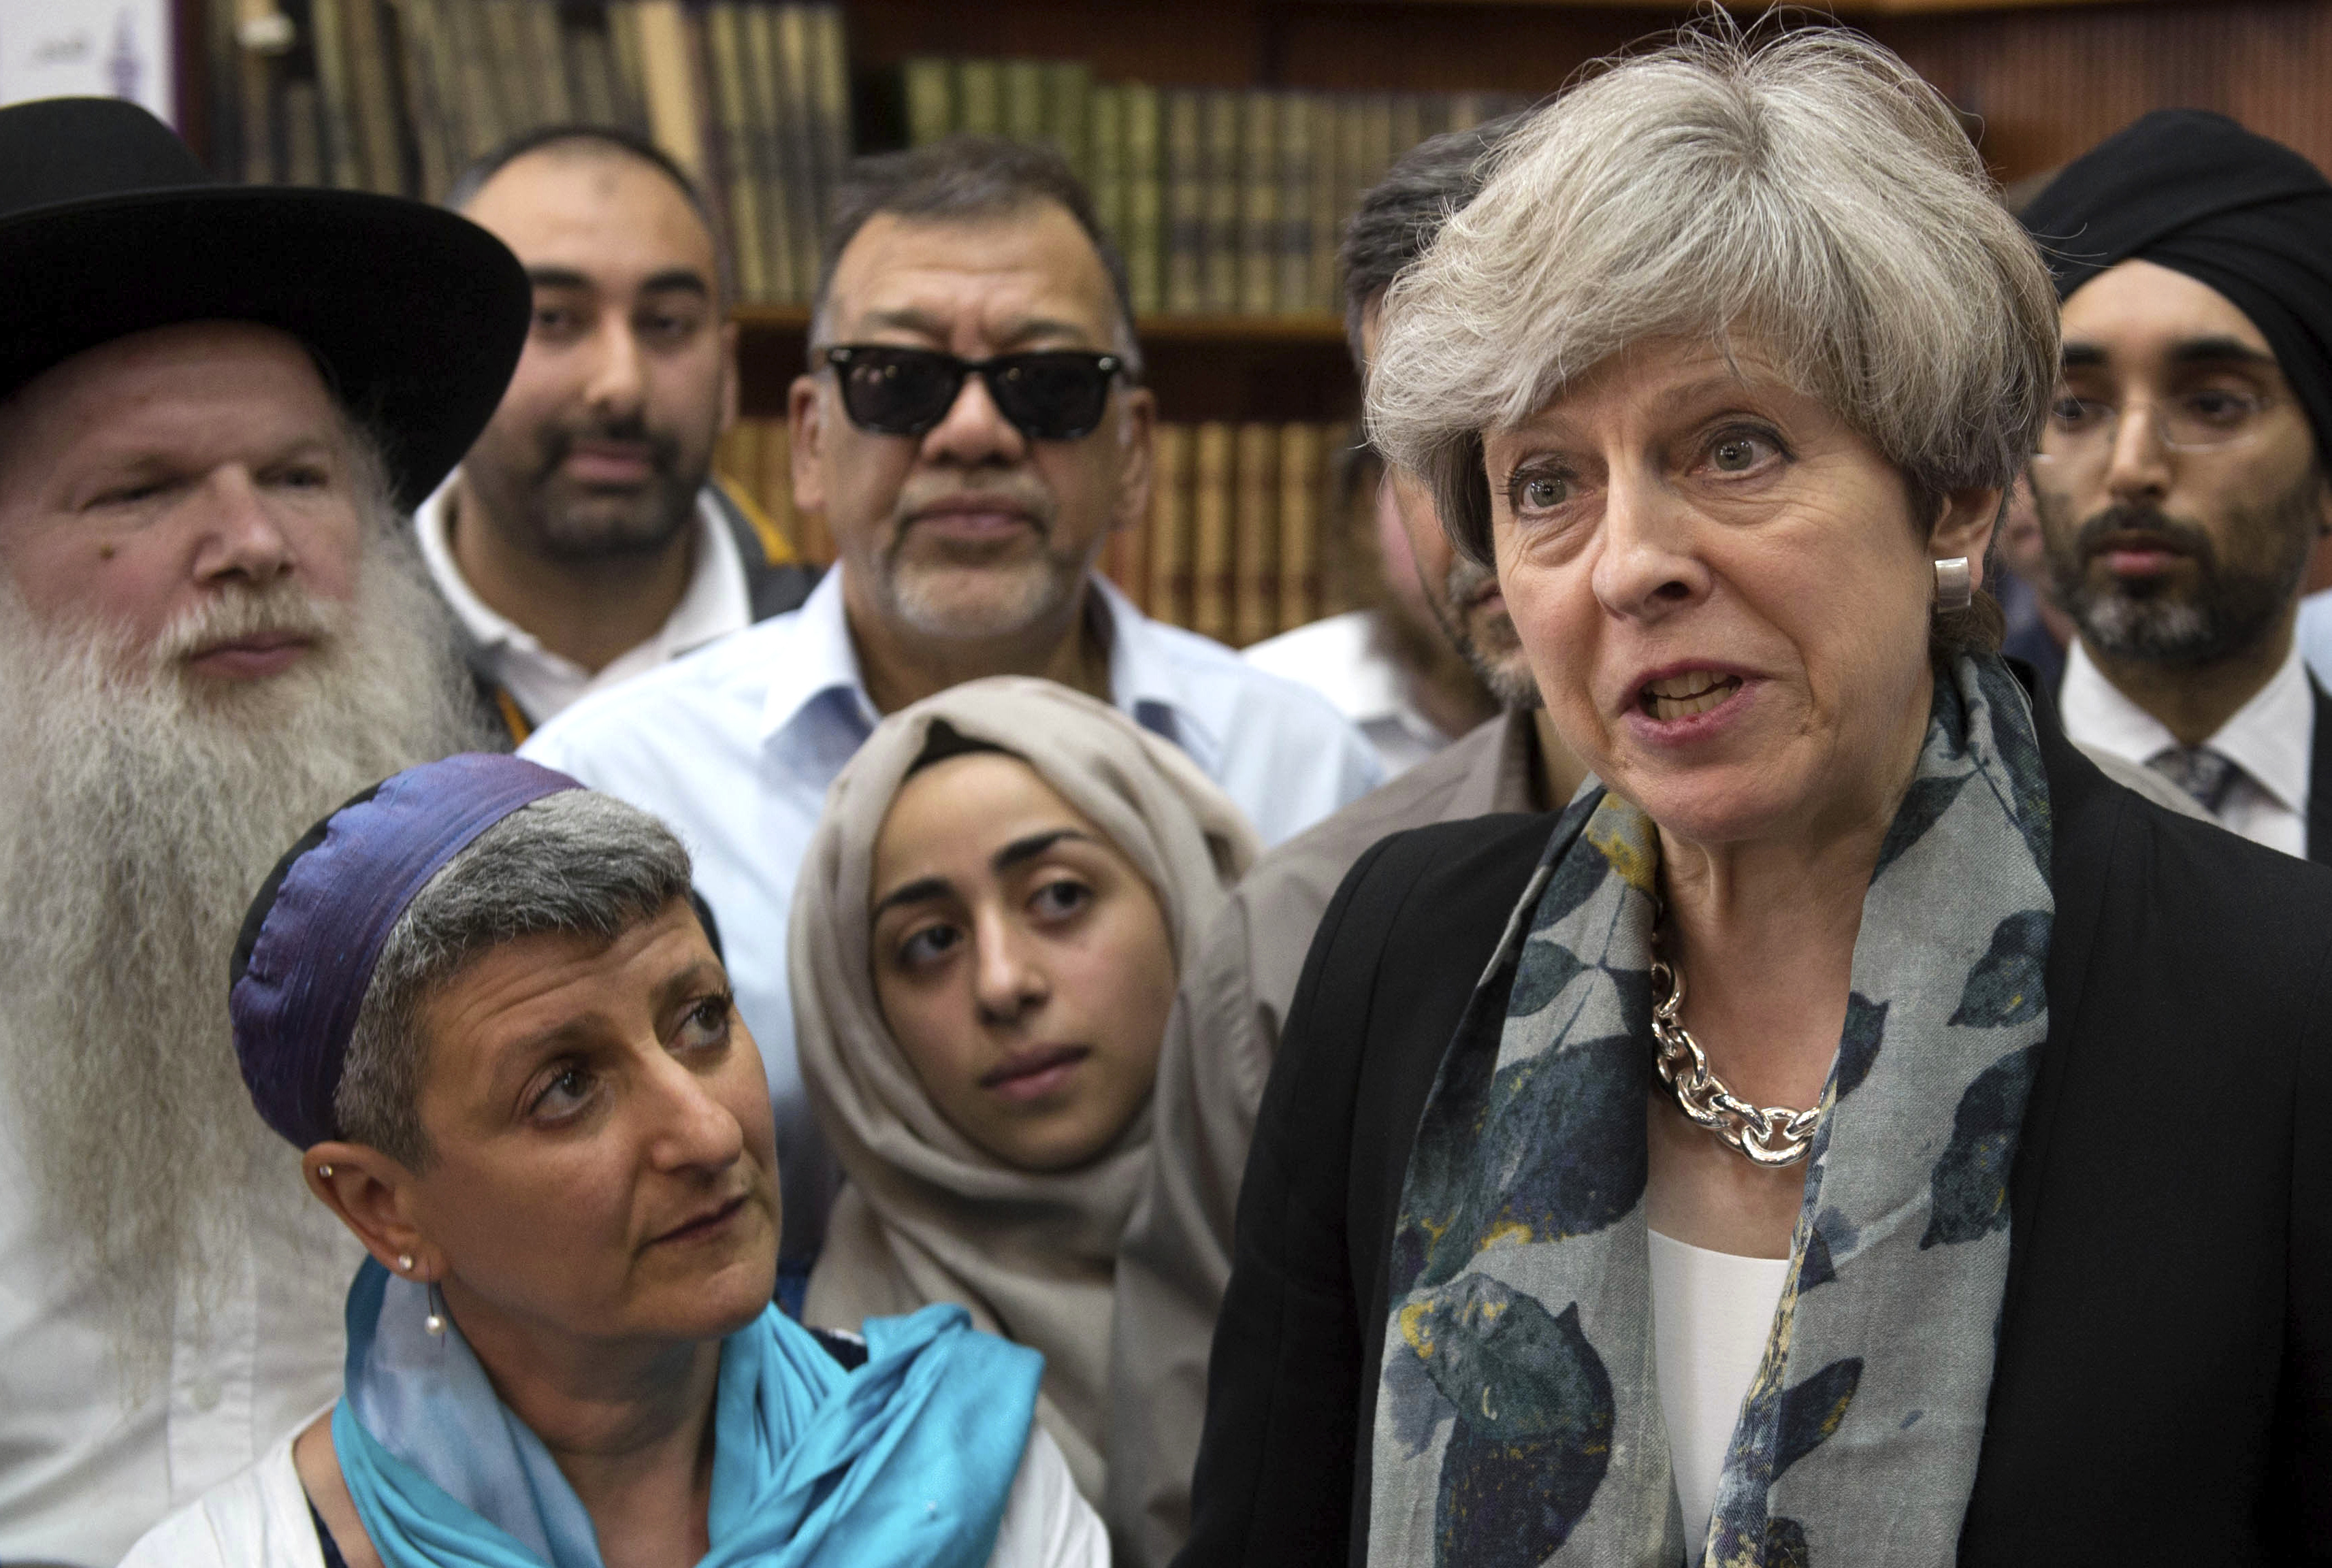 Britain's Prime Minister Theresa May, right, talk to faith leaders at Finsbury Park Mosque in north London, after an incident where where a van struck pedestrians, in London, Monday June 19, 2017. British authorities and Islamic leaders moved swiftly to ease concerns in the Muslim community after a man plowed his vehicle into a crowd of worshippers outside a north London mosque early Monday, injuring at least nine people.﻿﻿ (Stefan Rousseau/Pool Photo via AP)